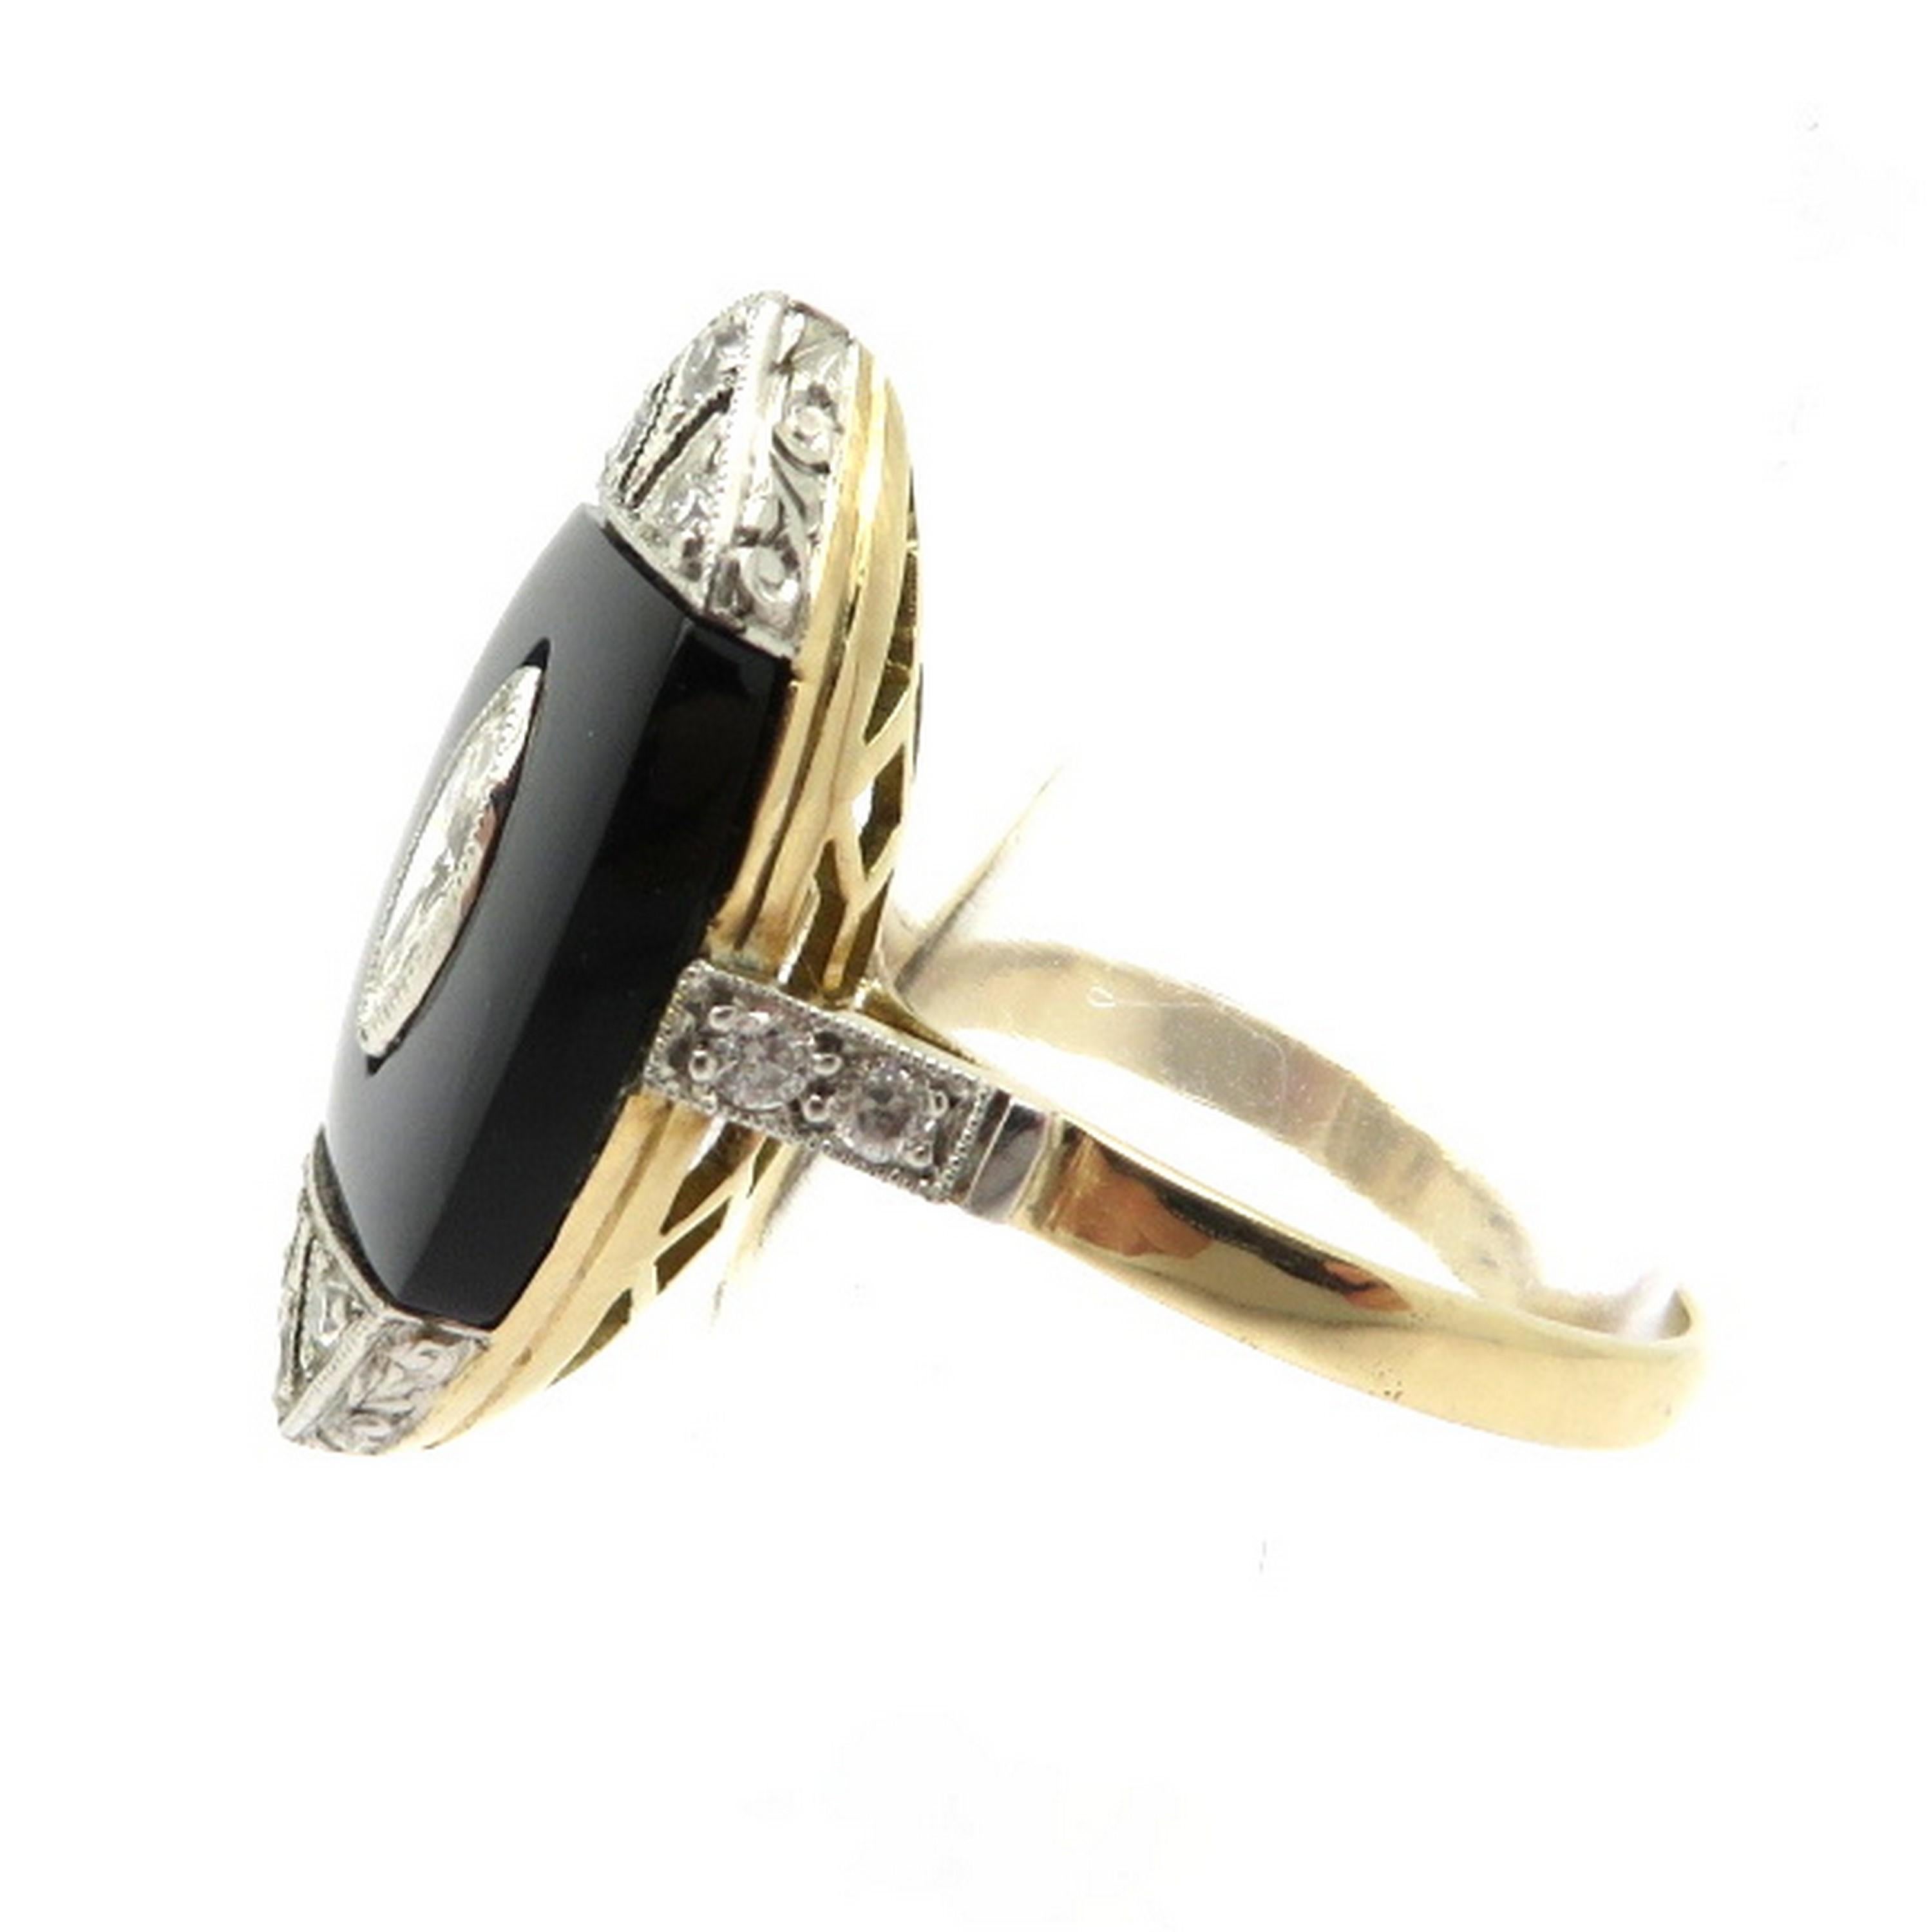 Estate Art Deco style 18K yellow gold and platinum black onyx and diamond navette ring. Showcasing one navette shaped fine quality black onyx. Accented with one bezel set marquise brilliant cut diamond, weighing approximately 0.26 carats. Displaying